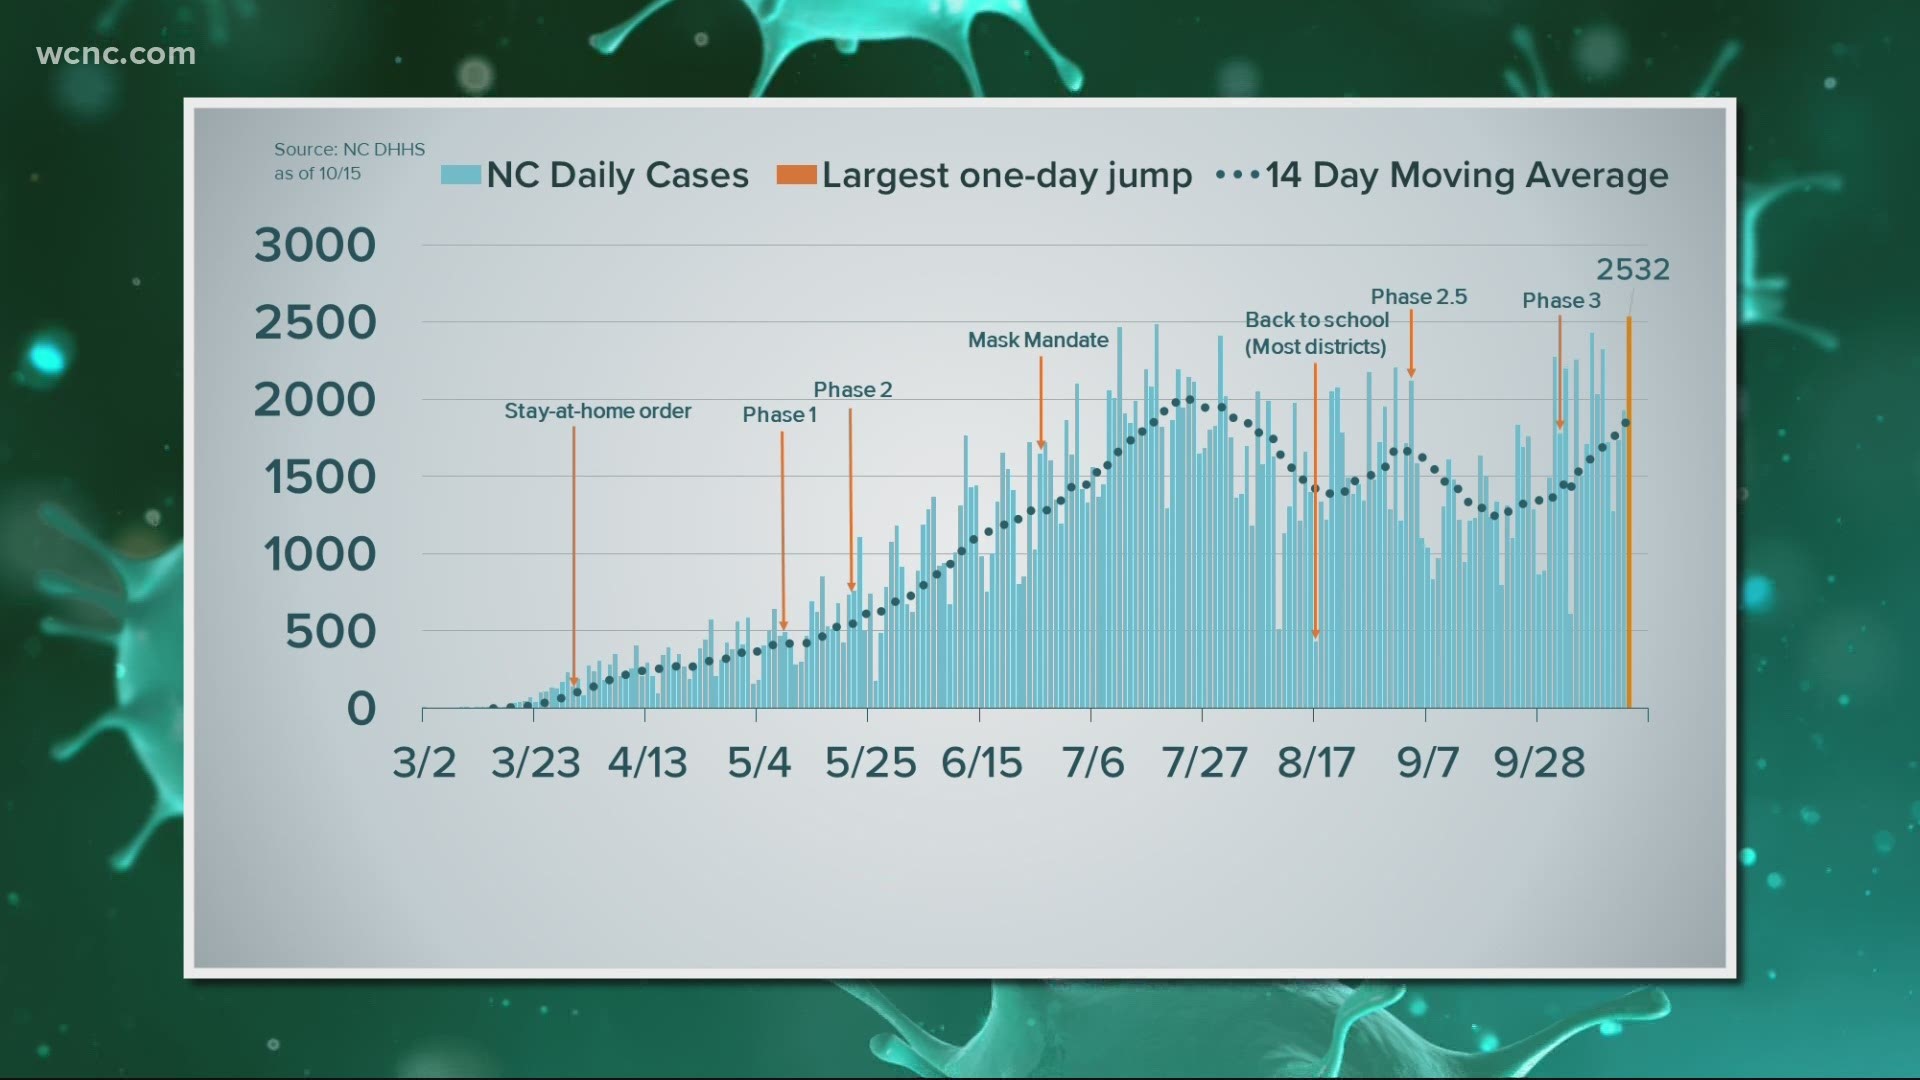 North Carolina health officials reported over 2,500 new COVID-19 cases Thursday, marking a single-day record.